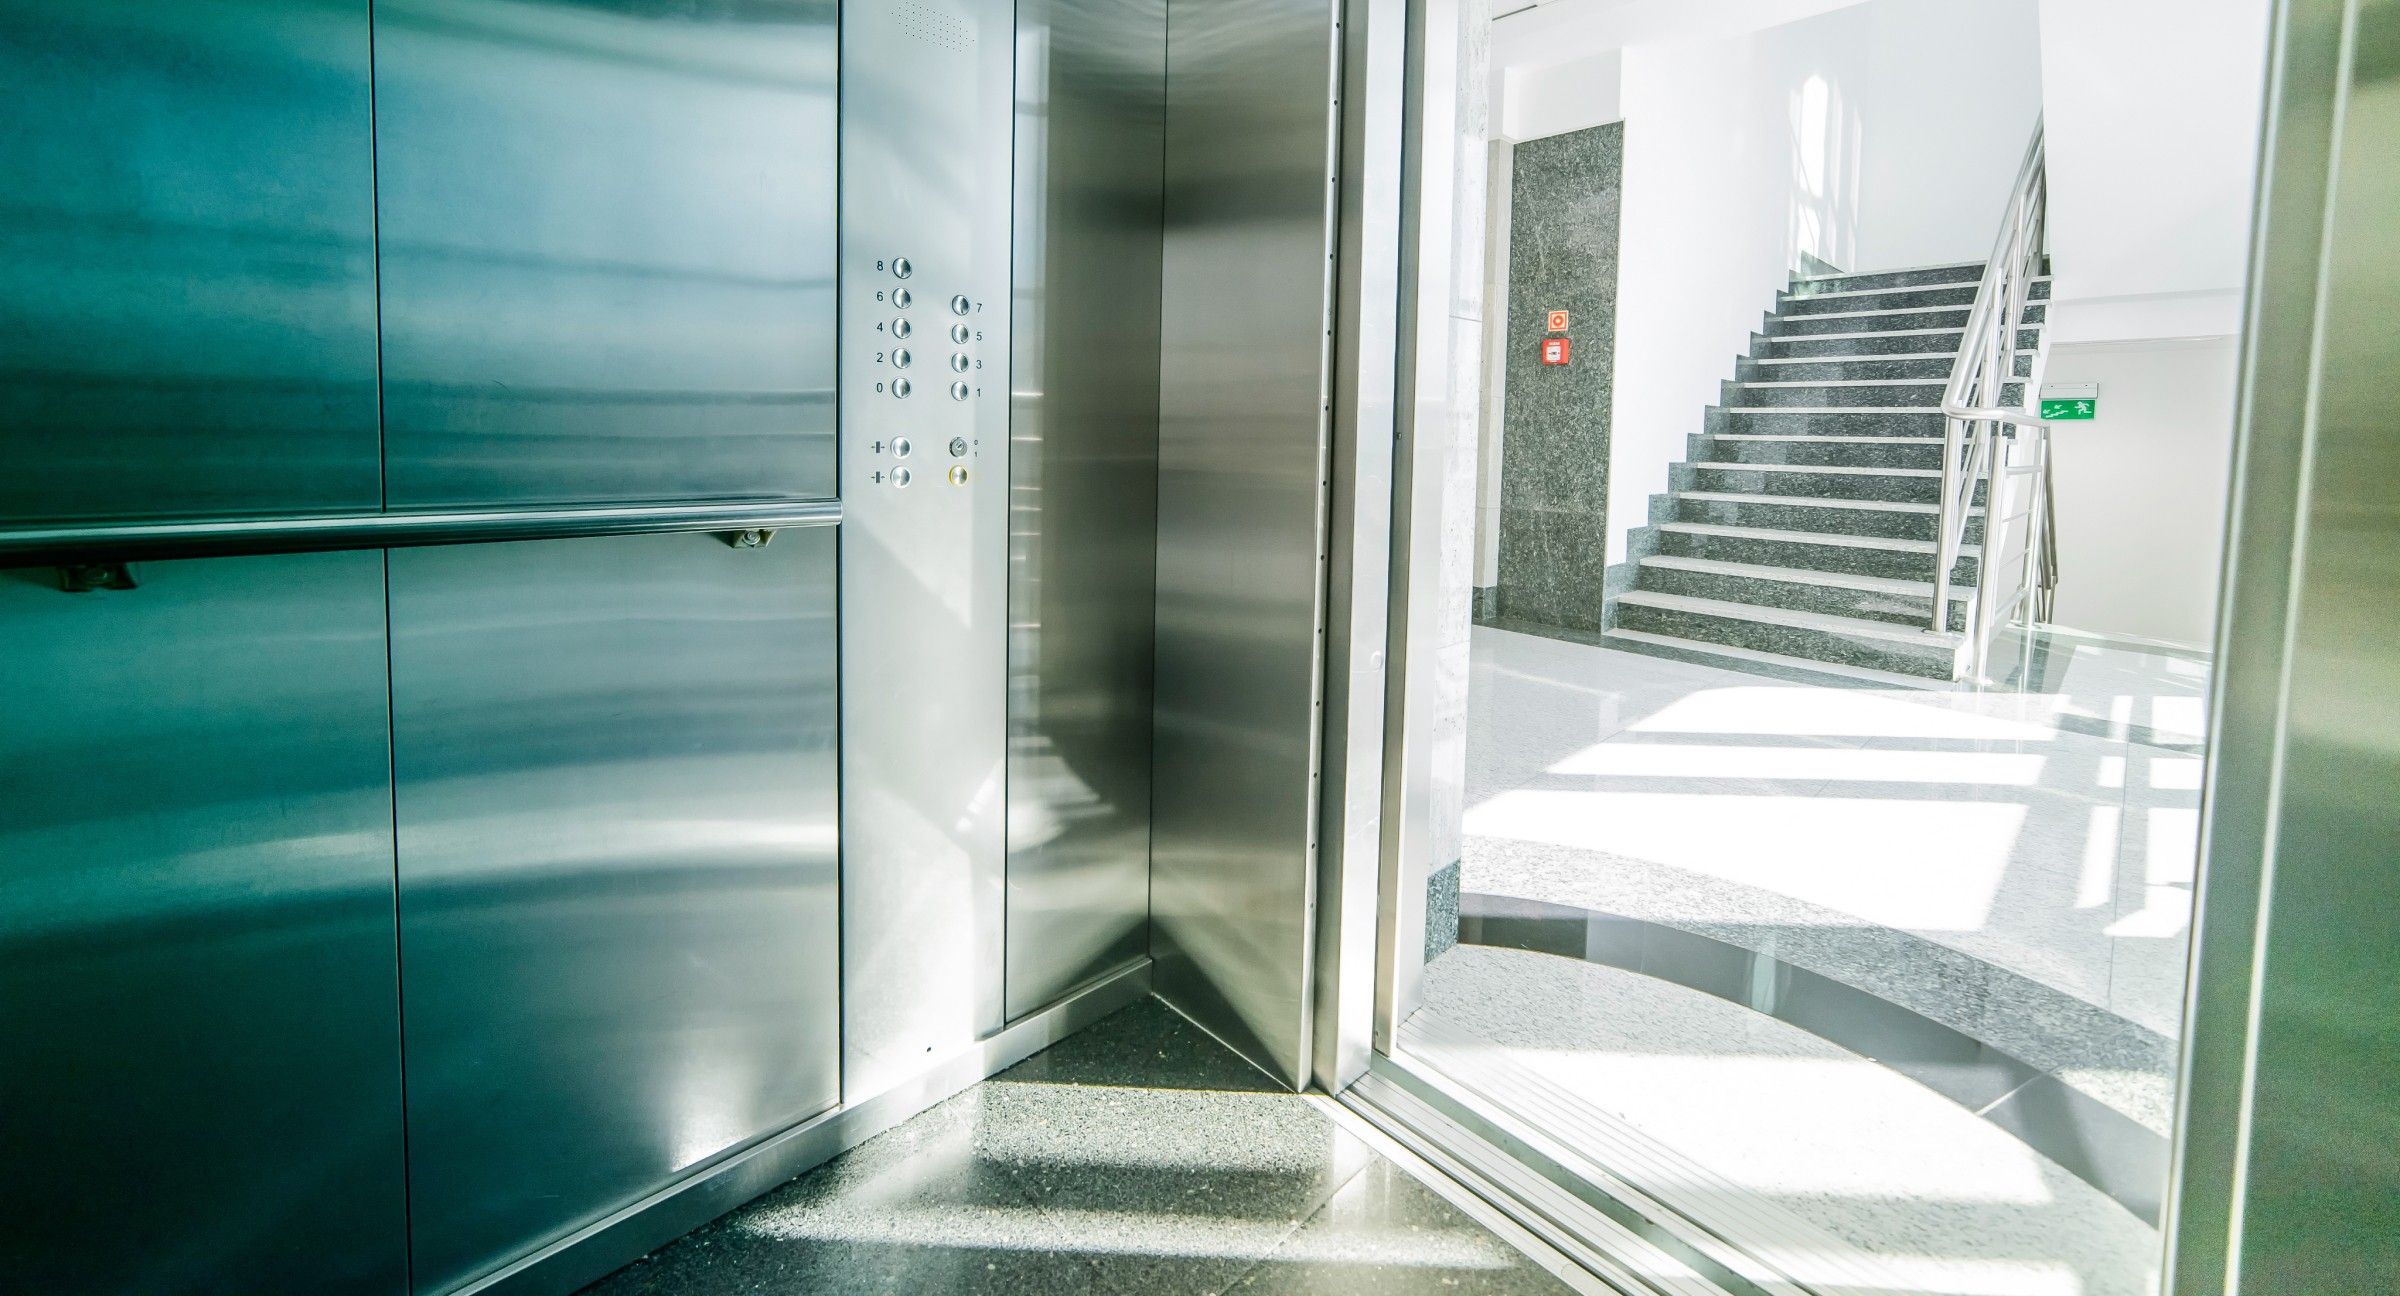 Elevator Interior Designs That Consider a Balance of Style and Safety